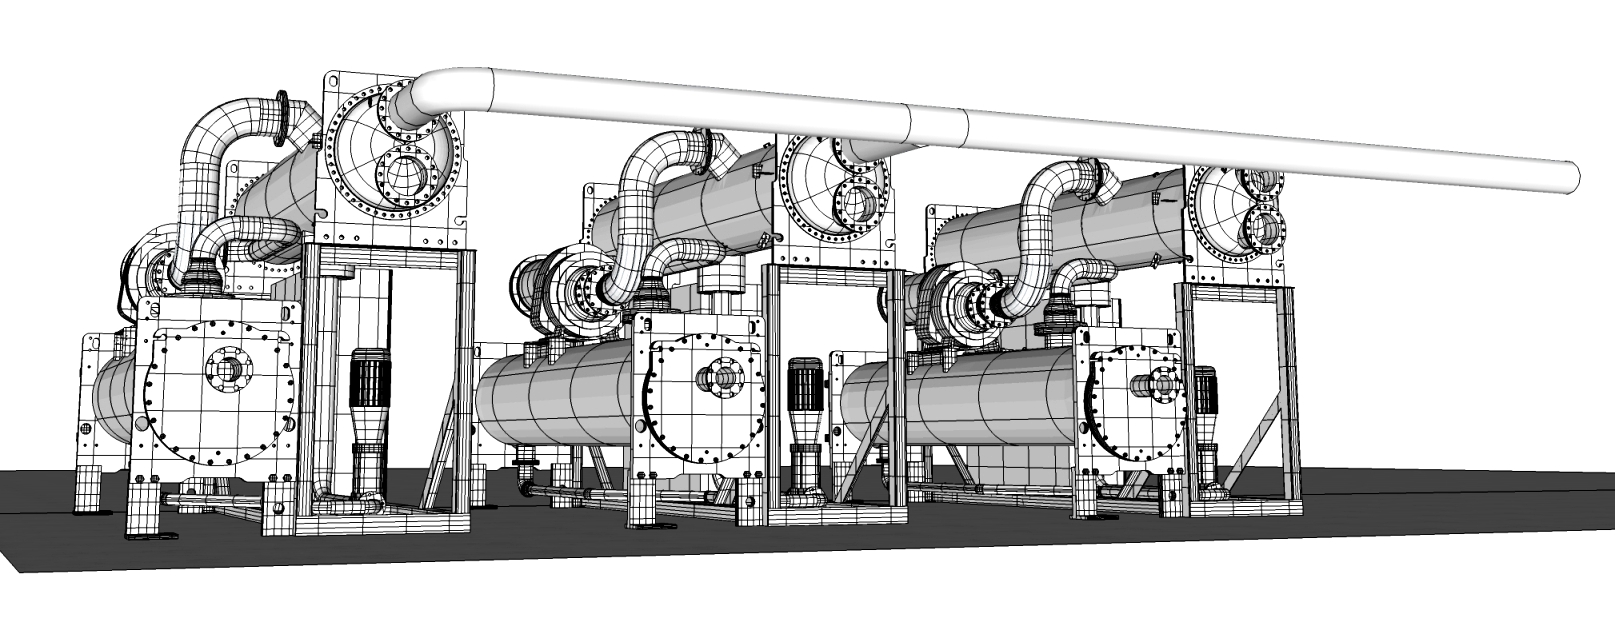 (15) PureCycle 280 KW geothermal power plants.